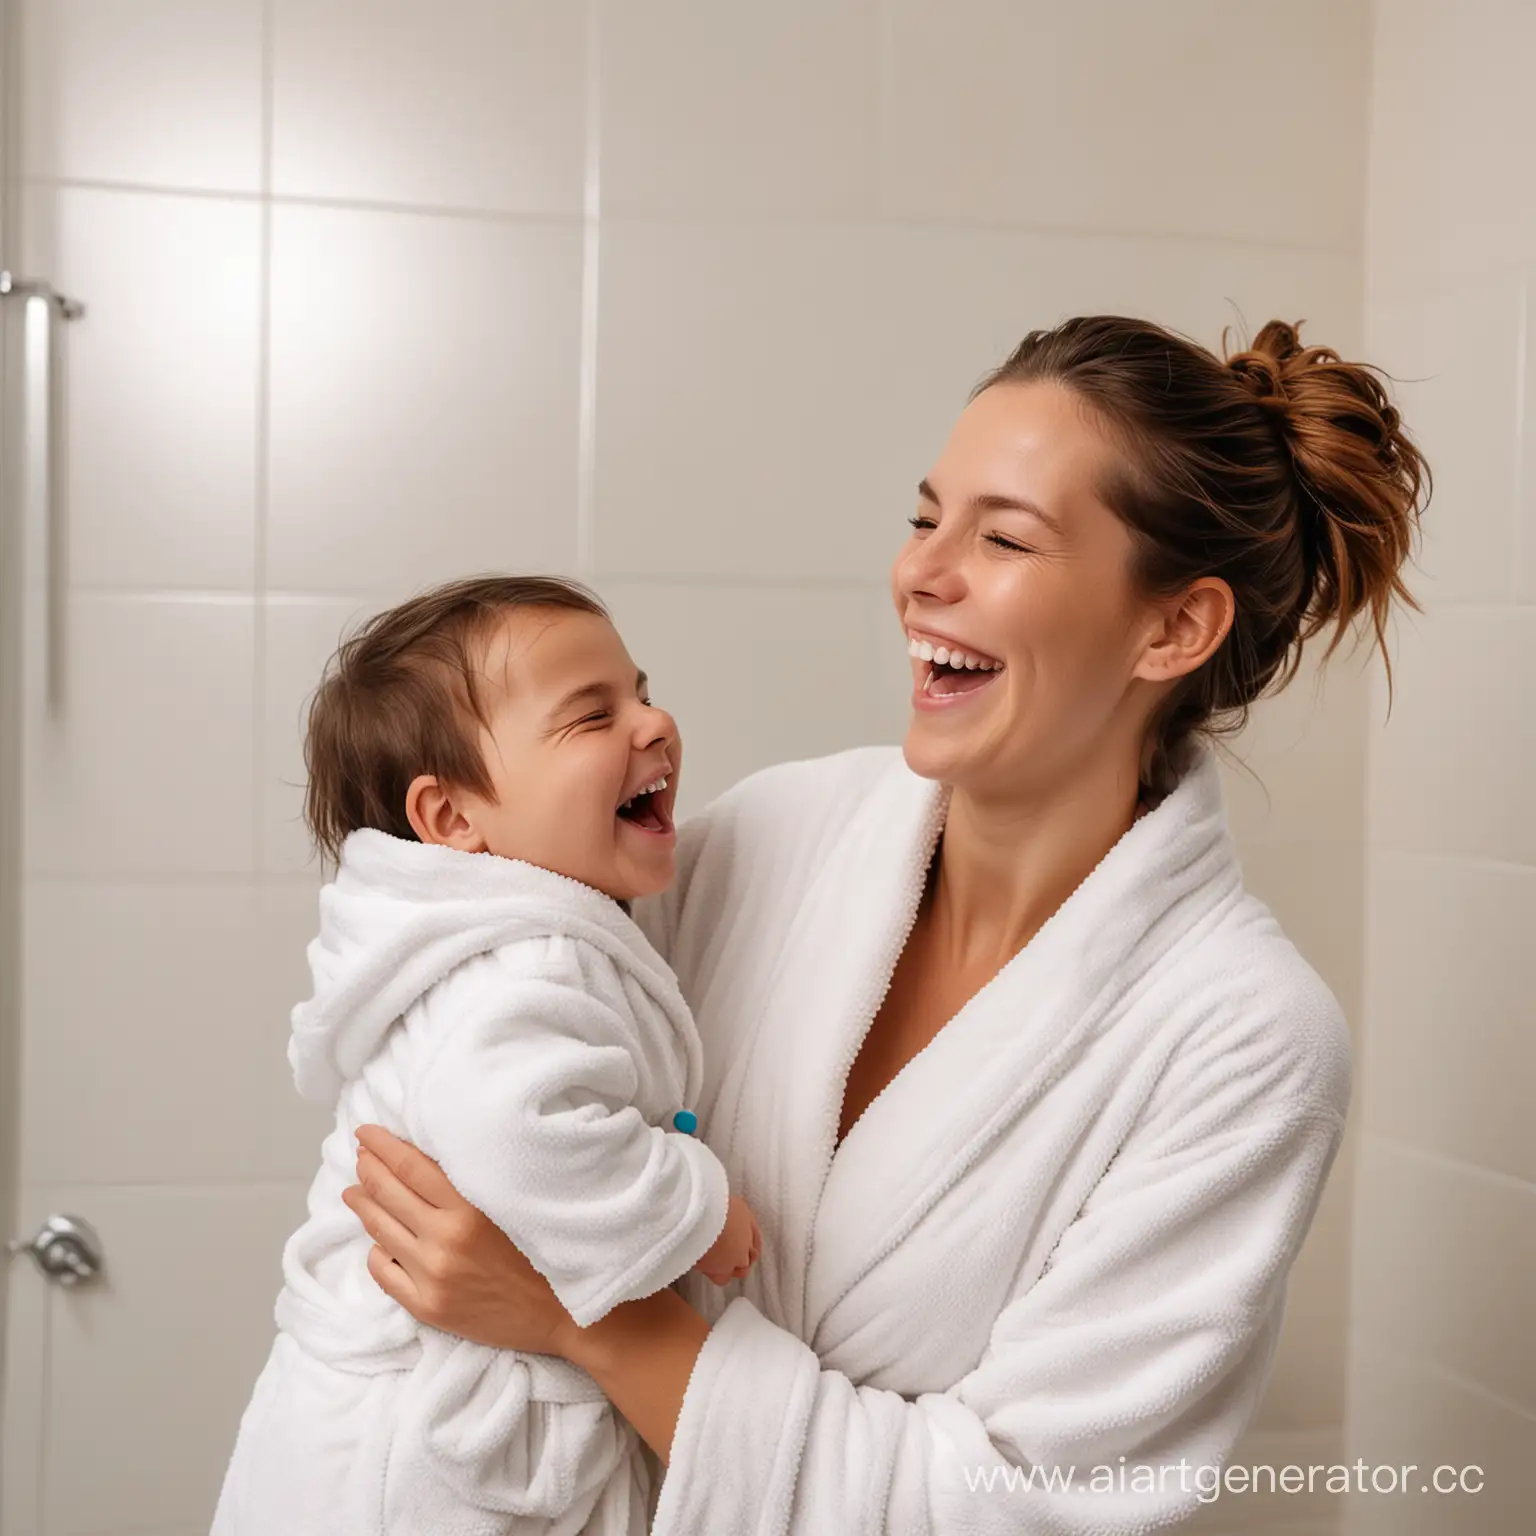 Joyful-Young-Woman-Holding-Laughing-Toddler-in-Bathroom